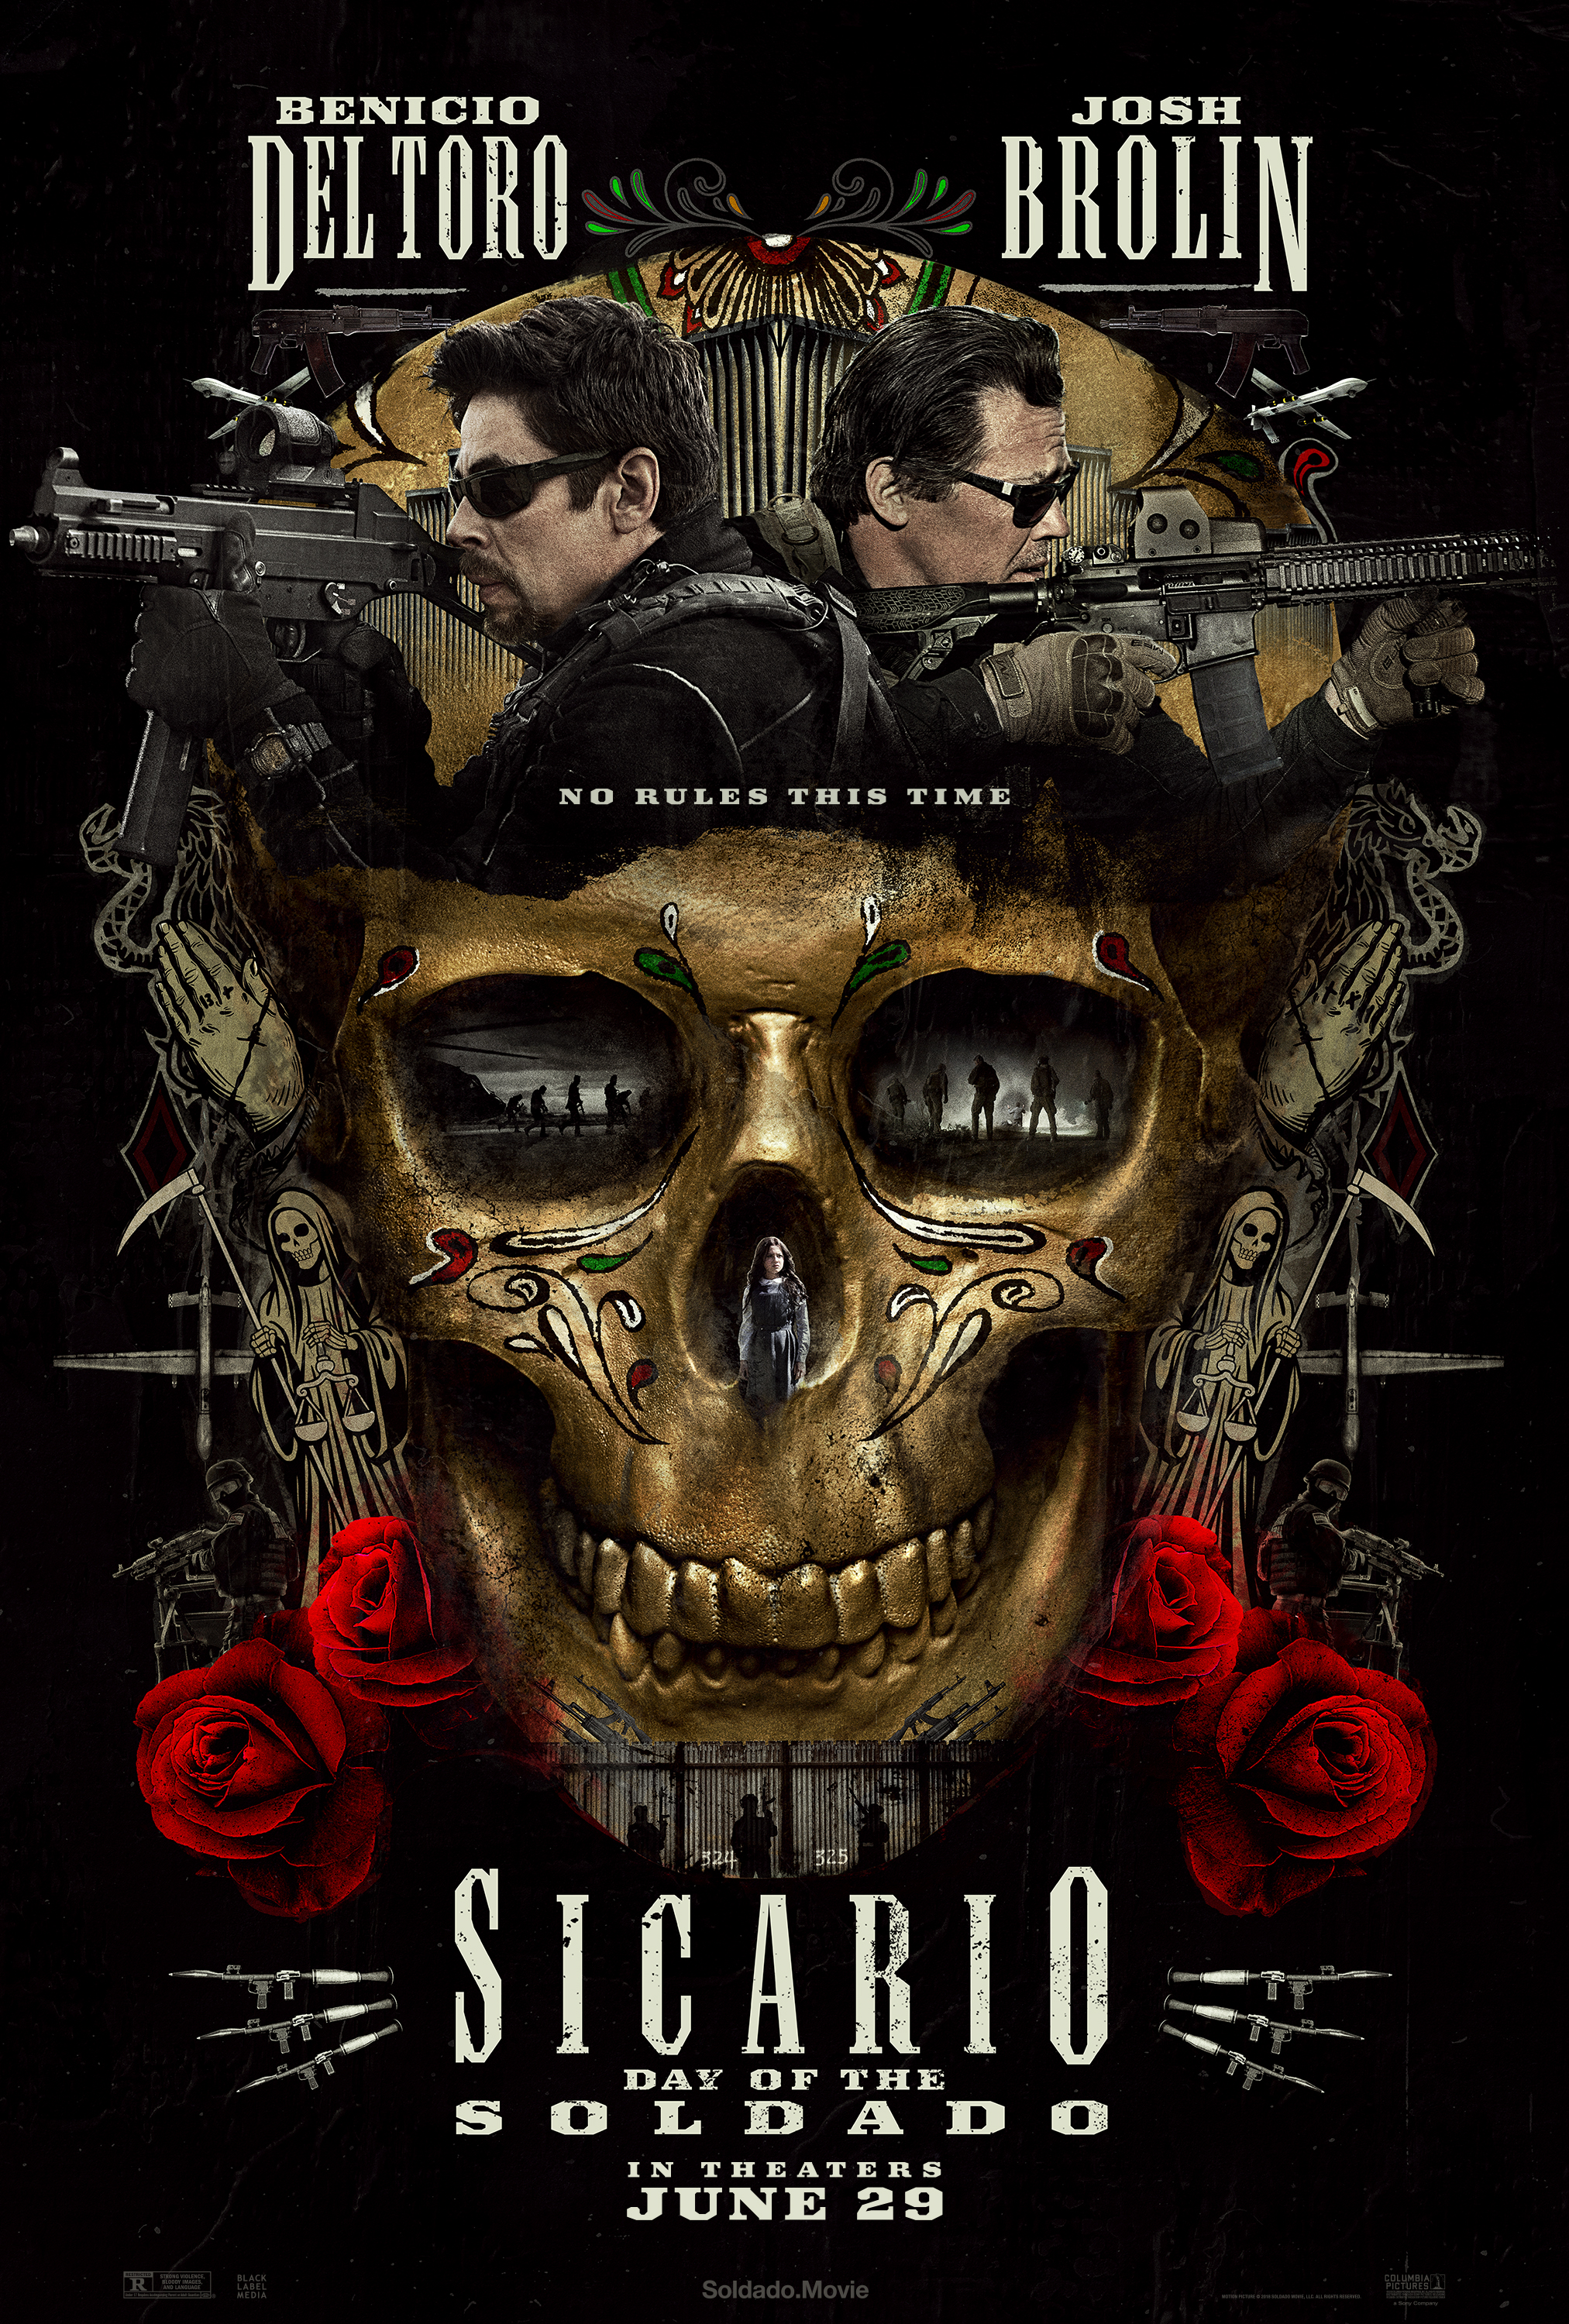 Sicario, Day Of The Soldado poster (Sony Pictures)